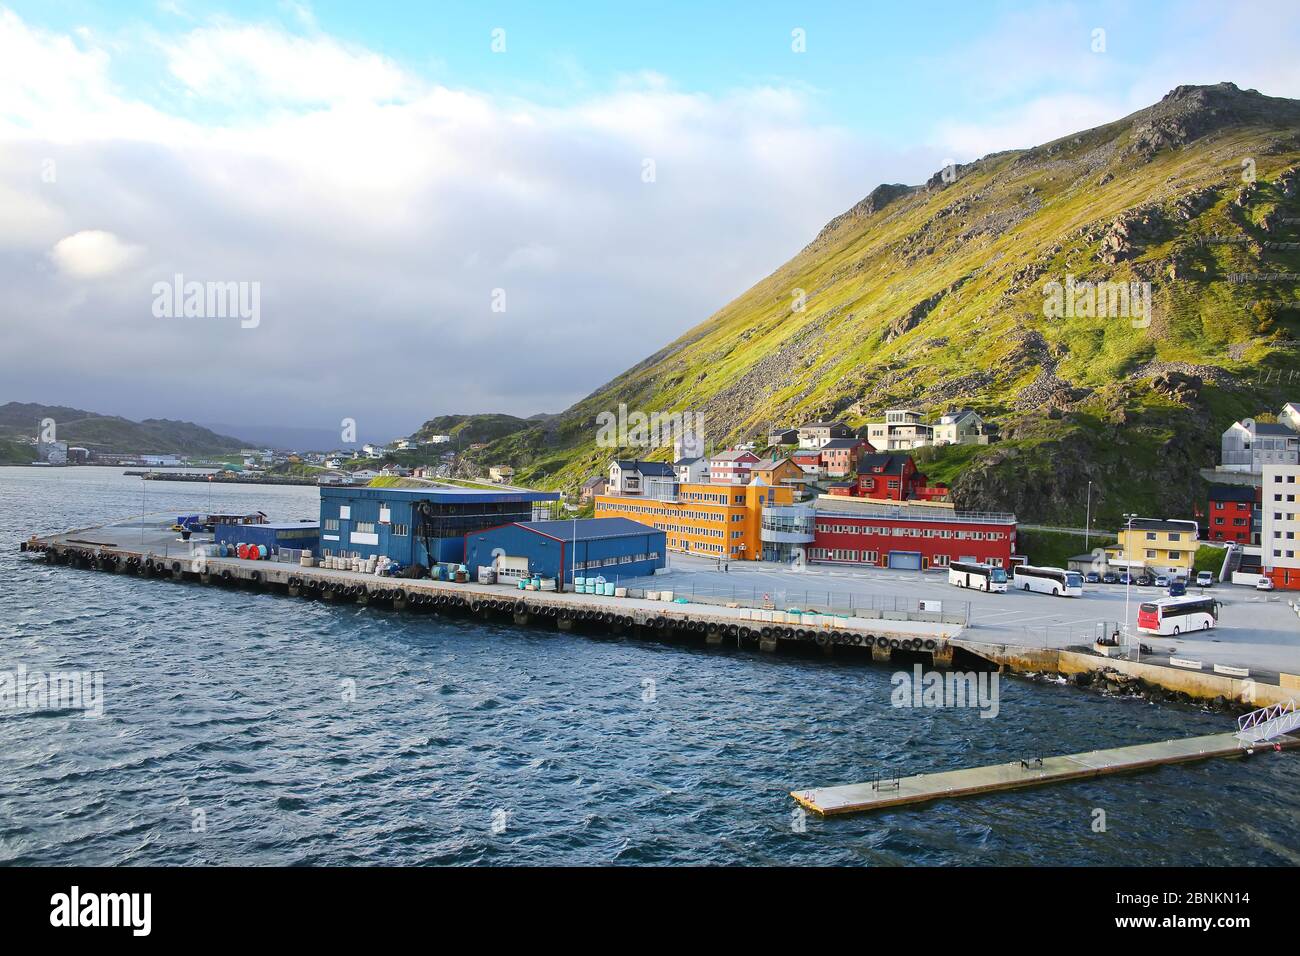 Port of Honningsvag, which is the northernmost city in Norway. It is located in Nordkapp Municipality in Troms og Finnmark county. Stock Photo